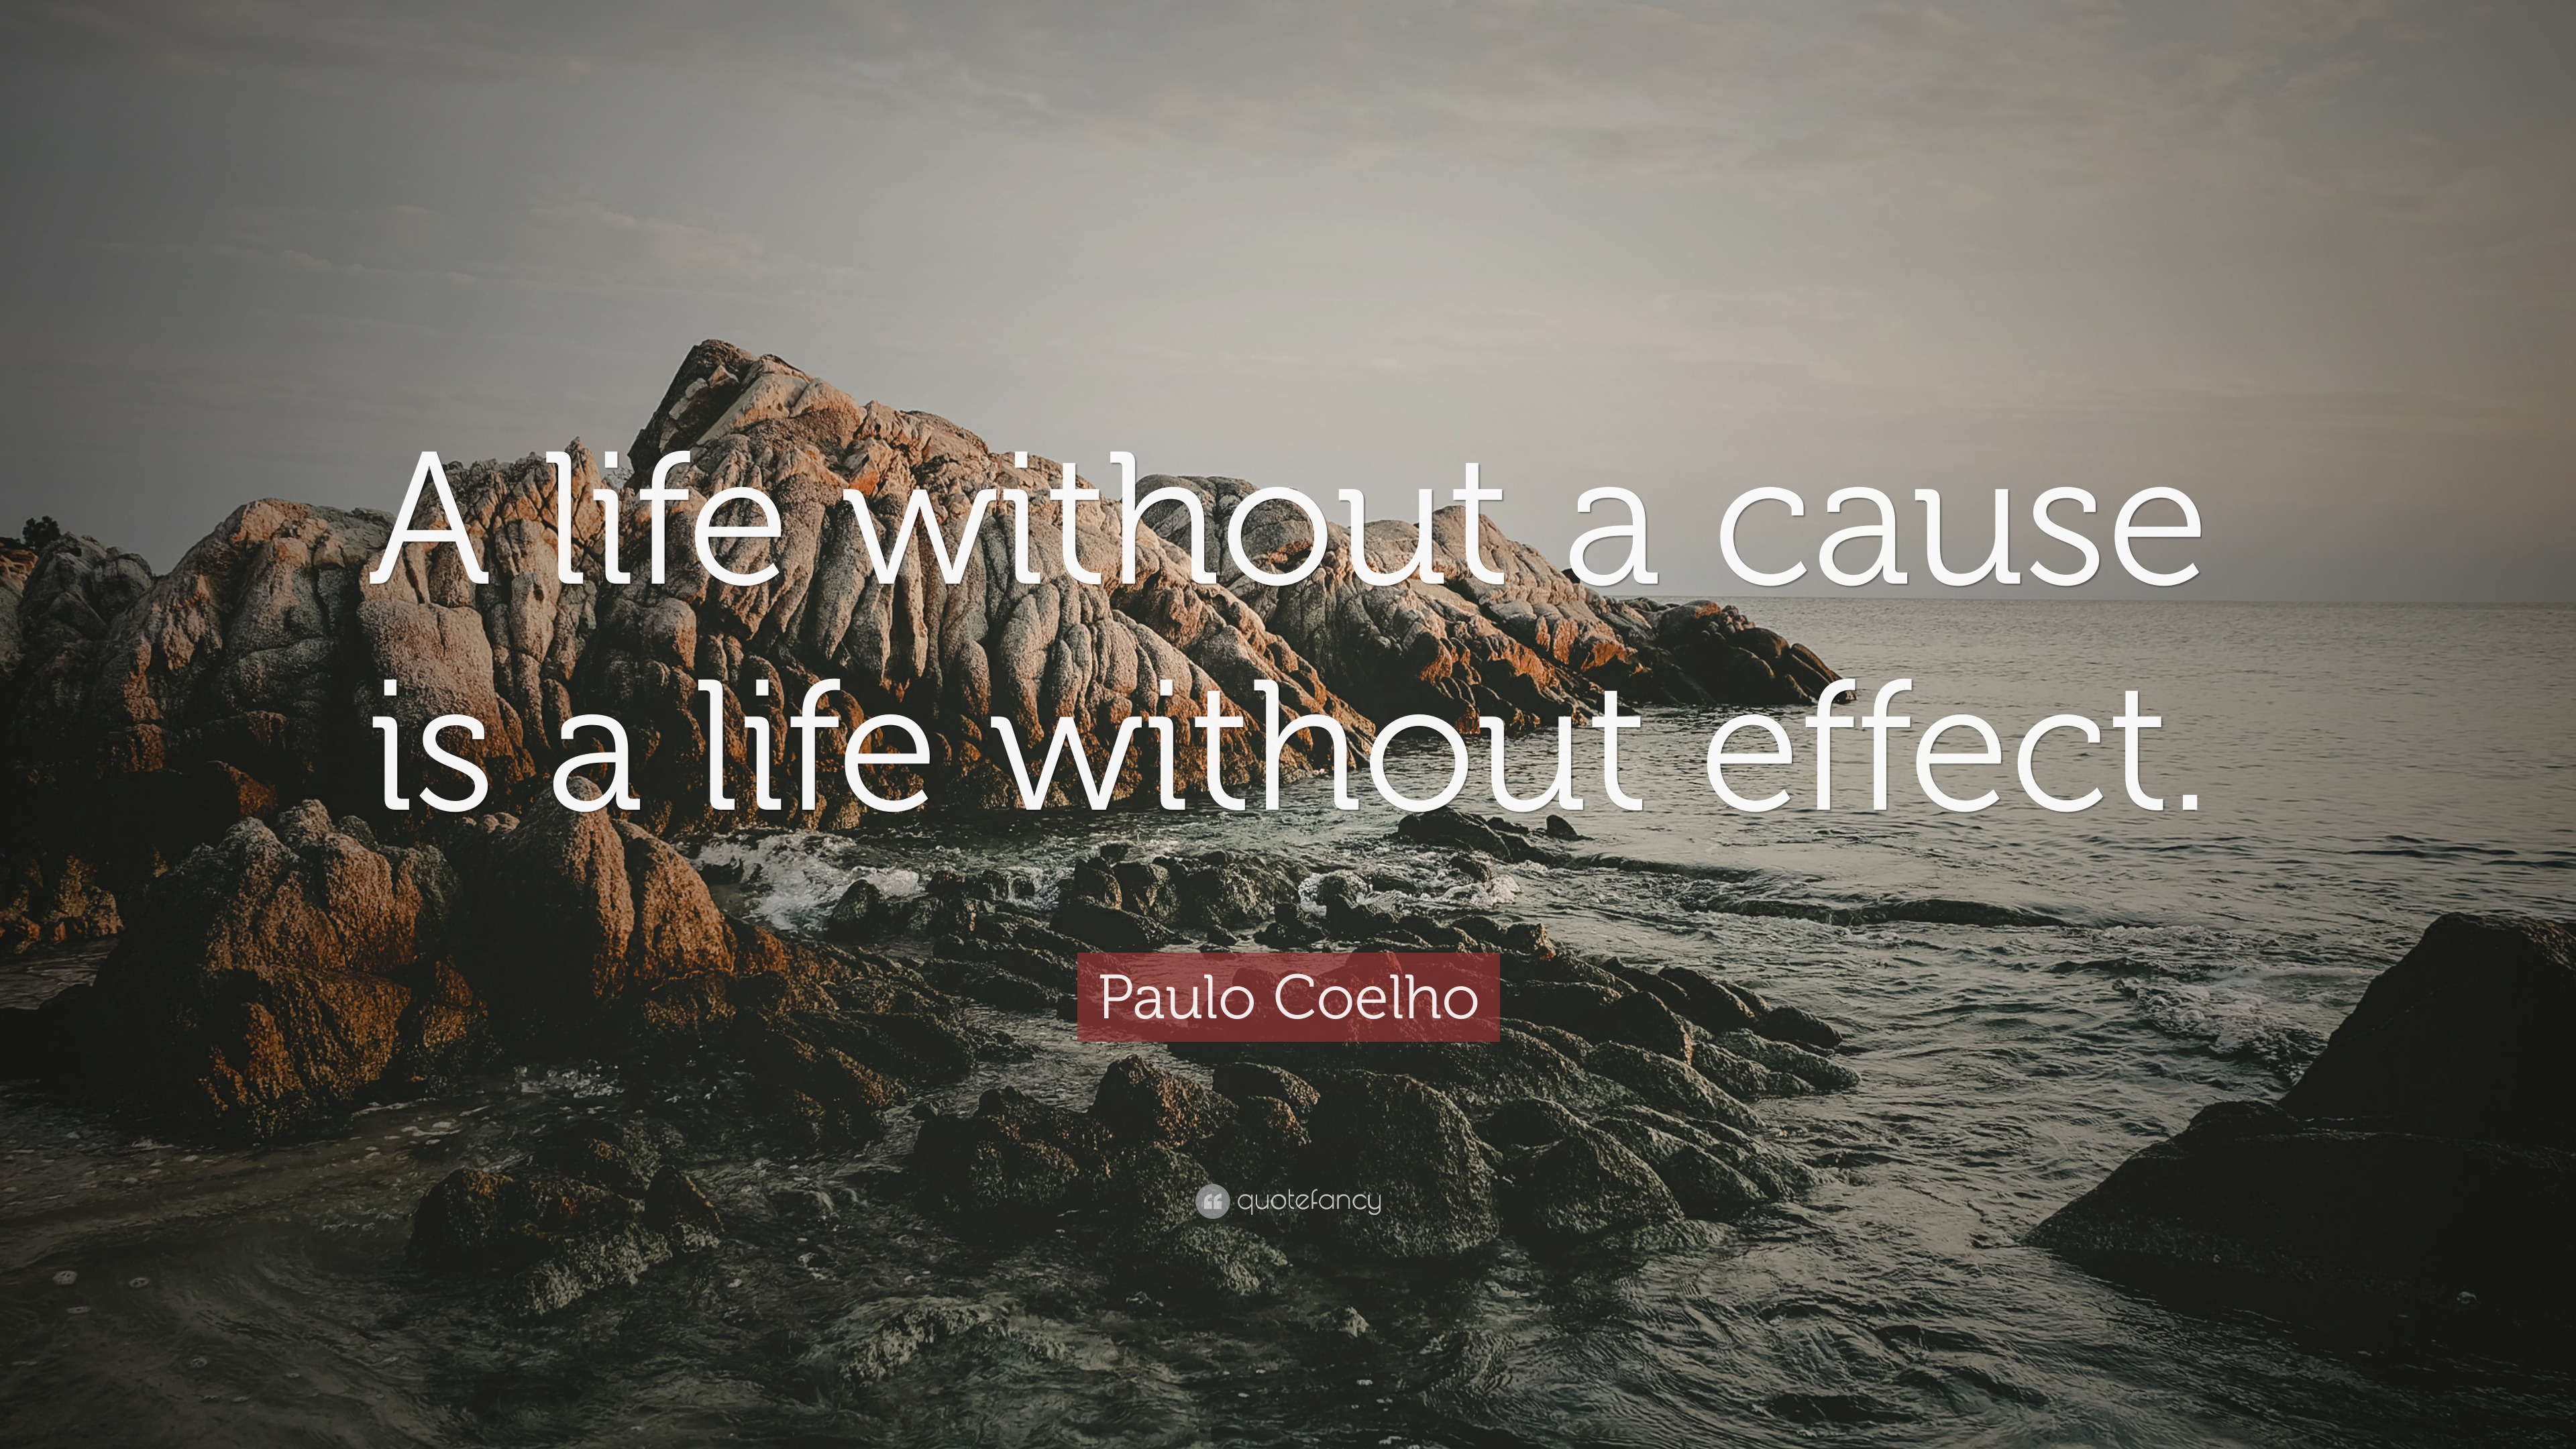 Paulo Coelho Quote: “A life without a cause is a life without effect.”